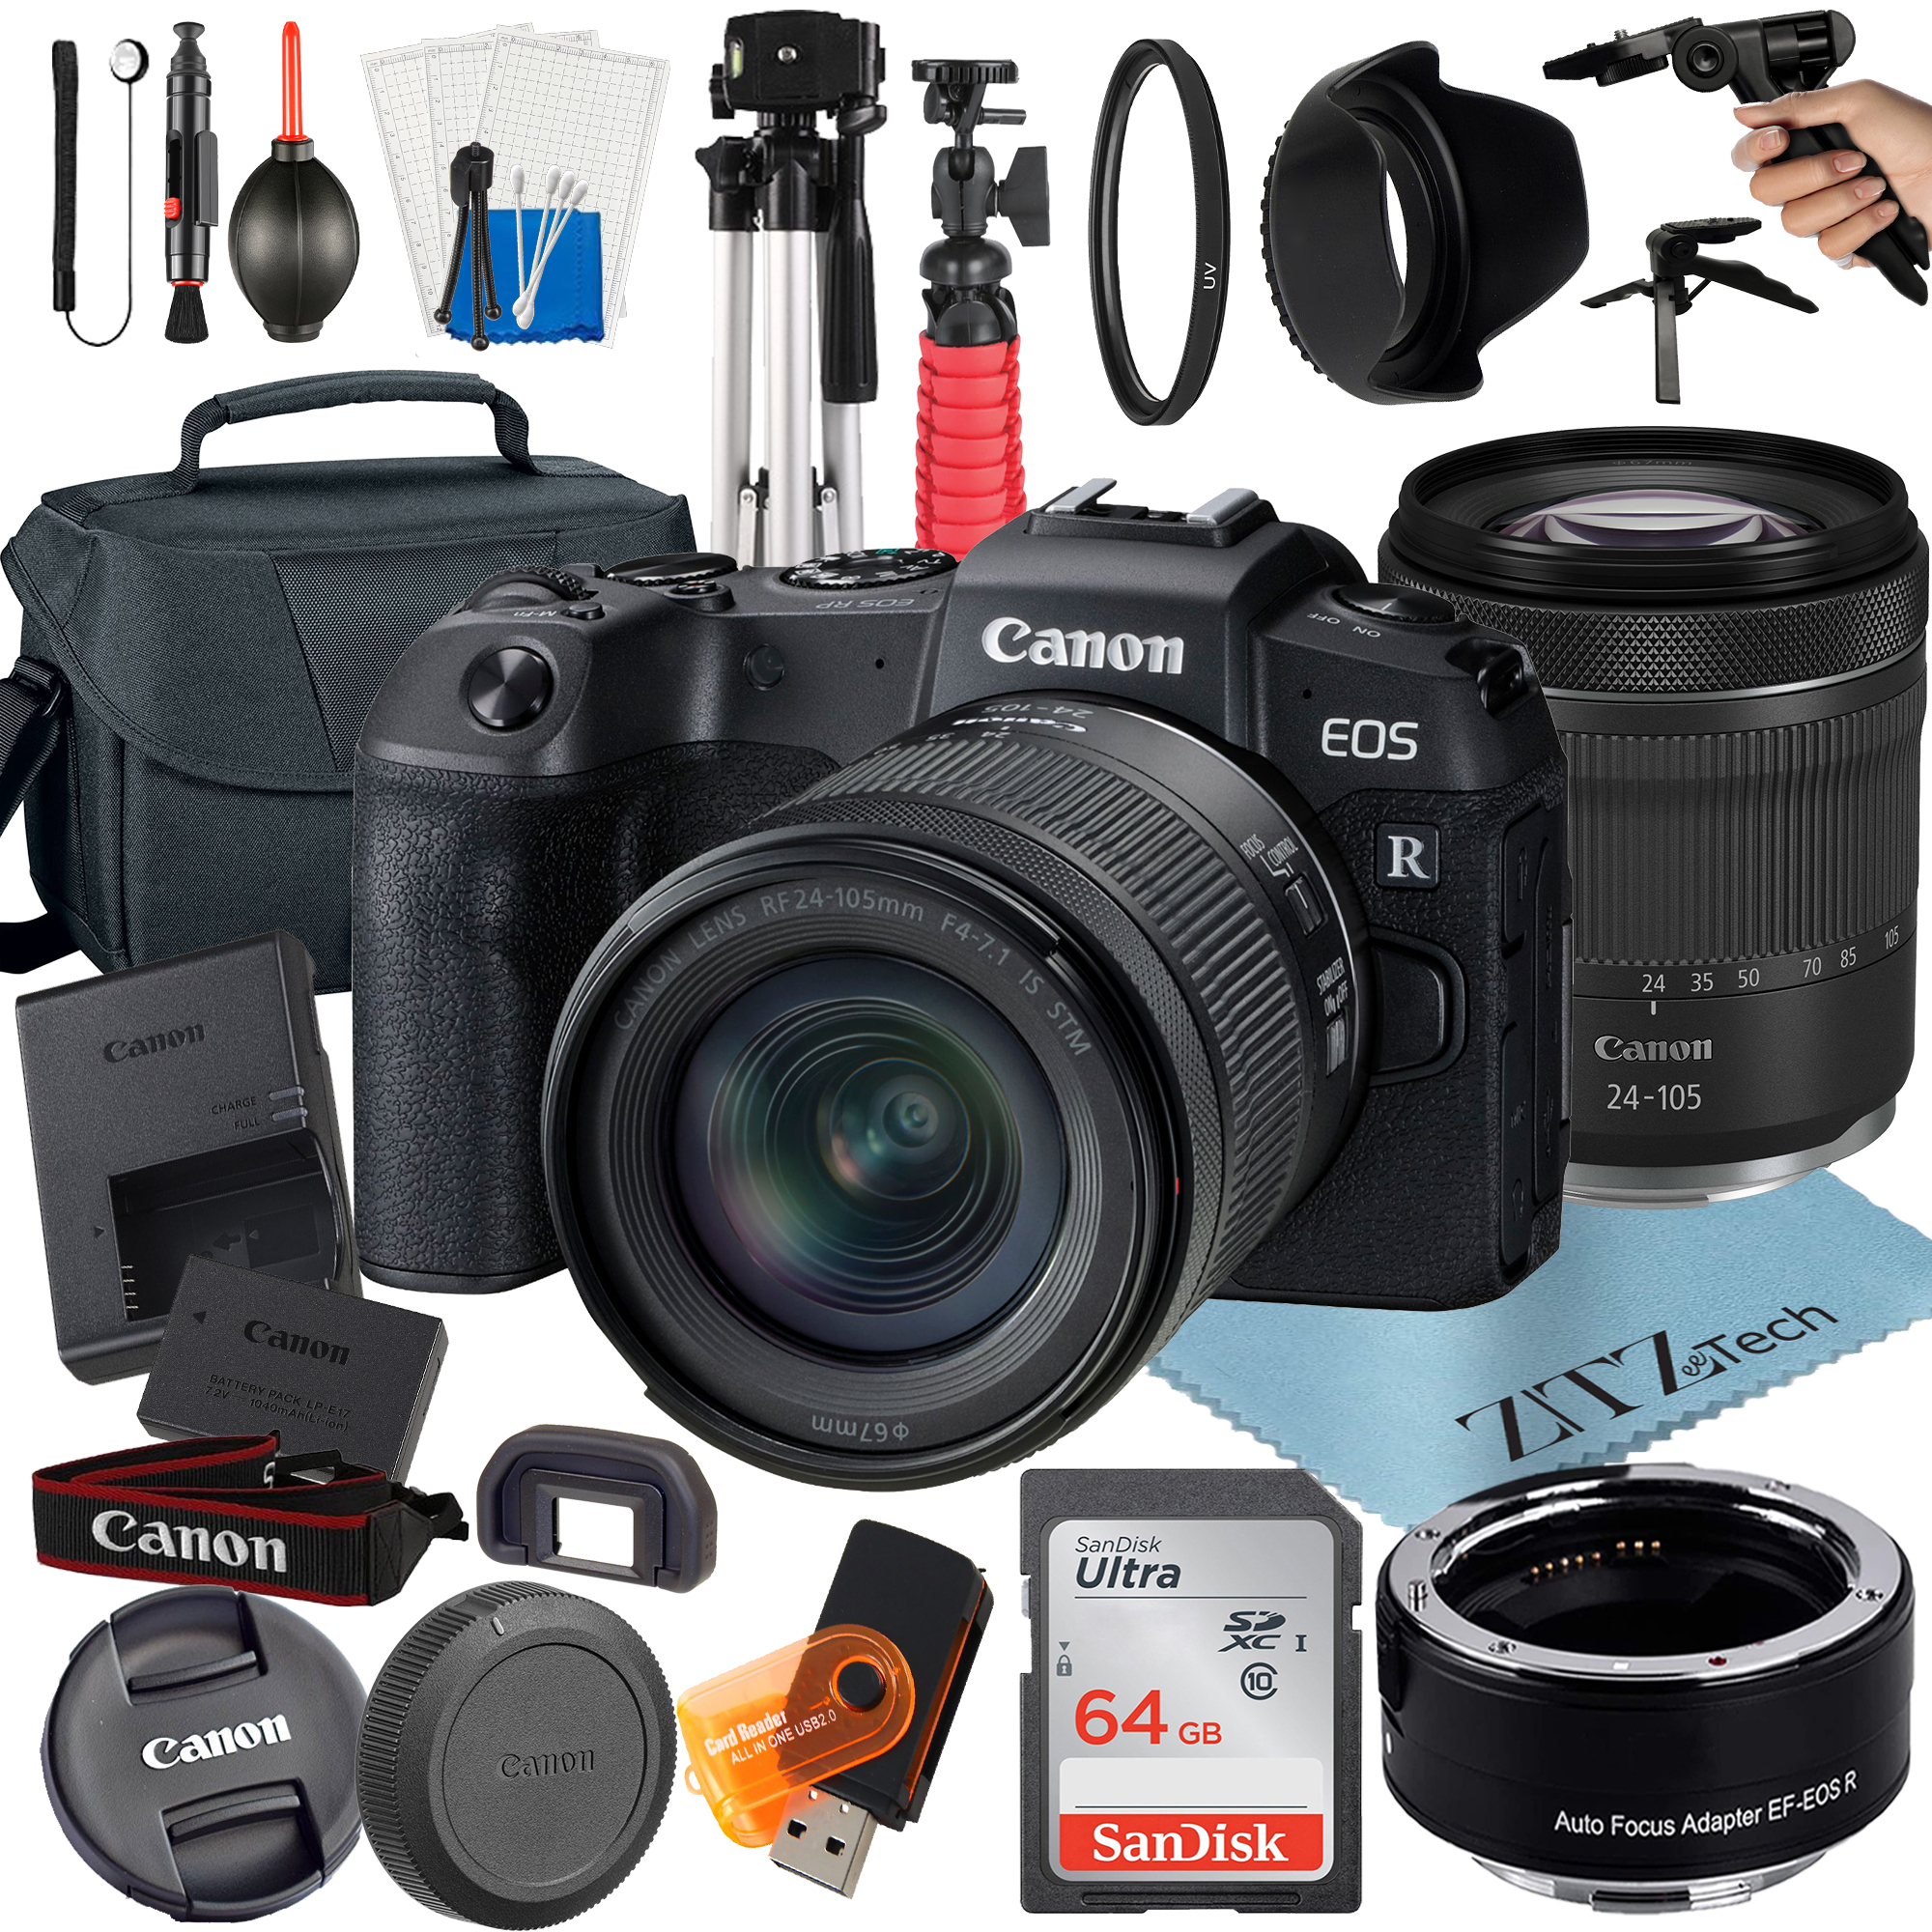 Canon EOS RP Mirrorless Digital Camera with RF 24-105mm STM Lens + Mount Adapter + 64GB SanDisk + ZeeTech Accessory